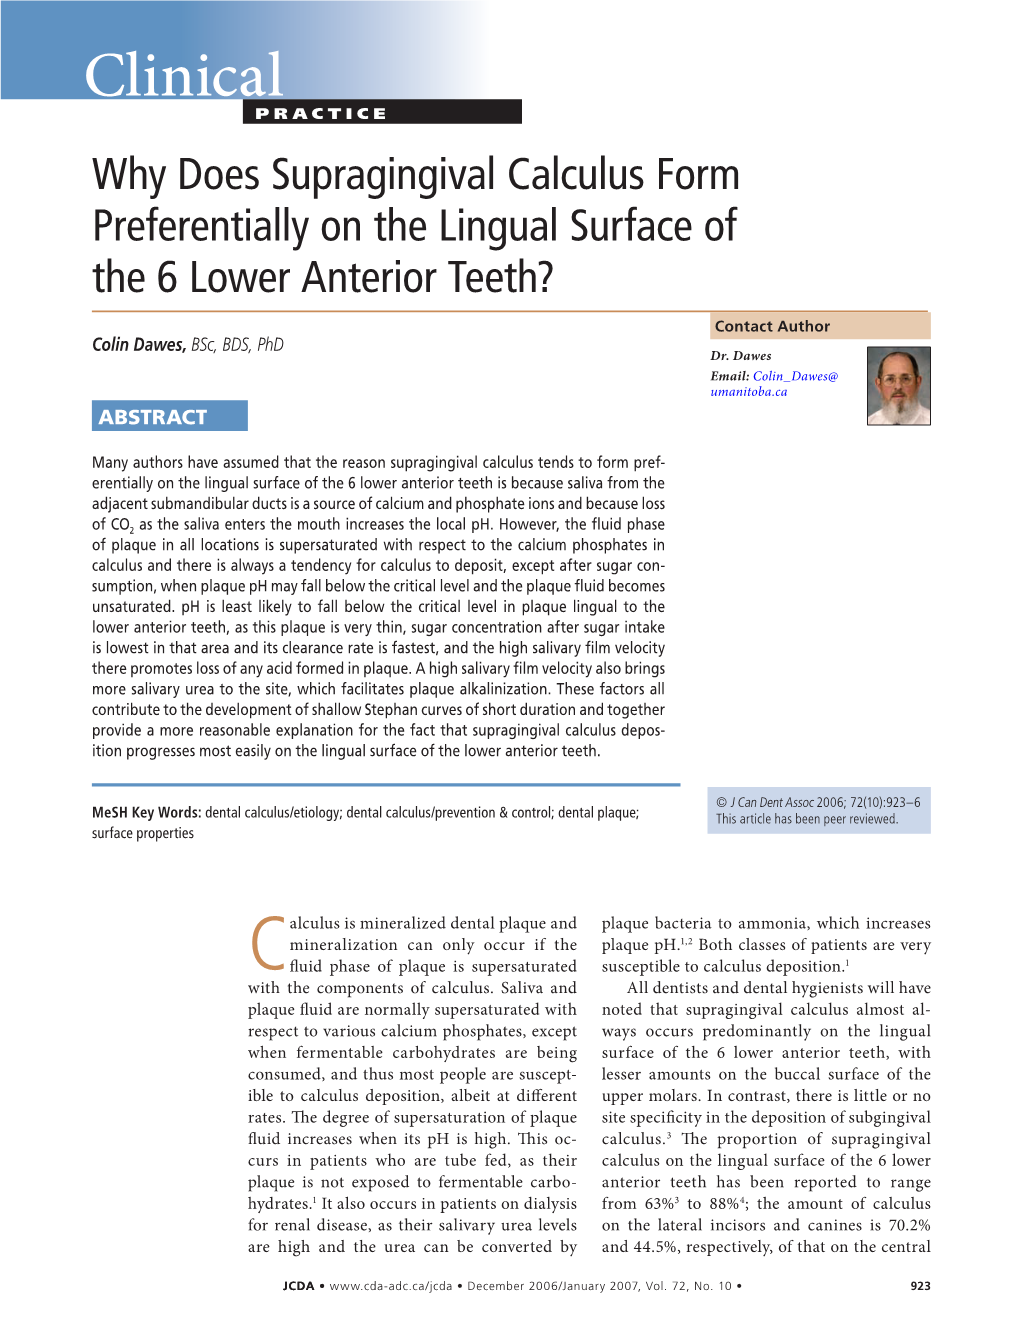 Why Does Supragingival Calculus Form Preferentially on the Lingual Surface of the 6 Lower Anterior Teeth?